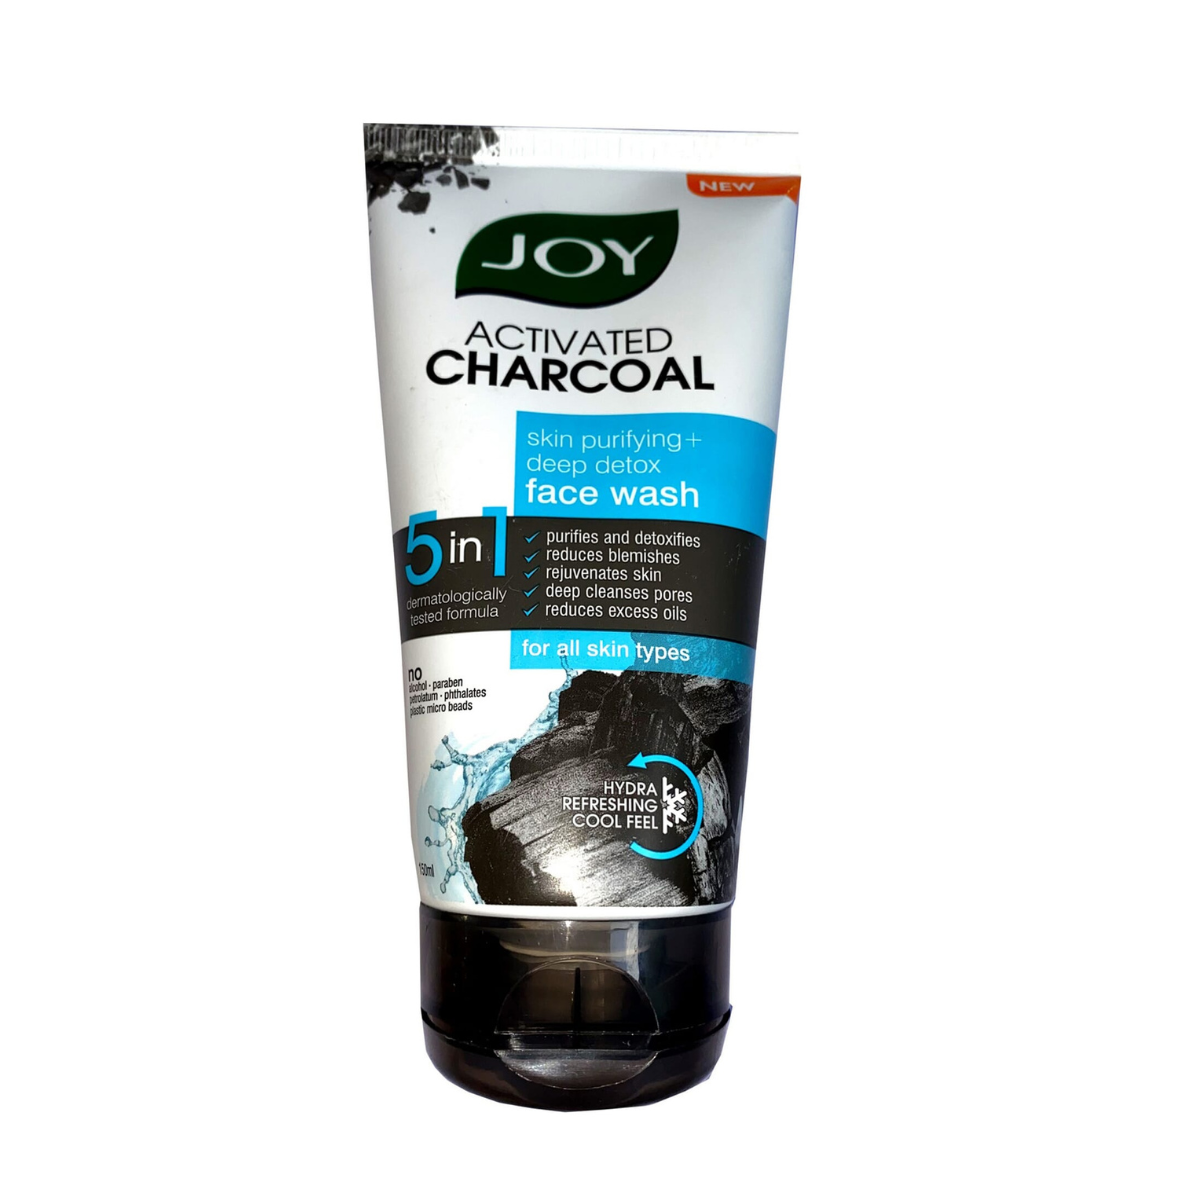 Joy Activated Charcoal Face Wash - Skin Purifying Deep Detox - Hydra Refreshing Cool Feel - 150ml